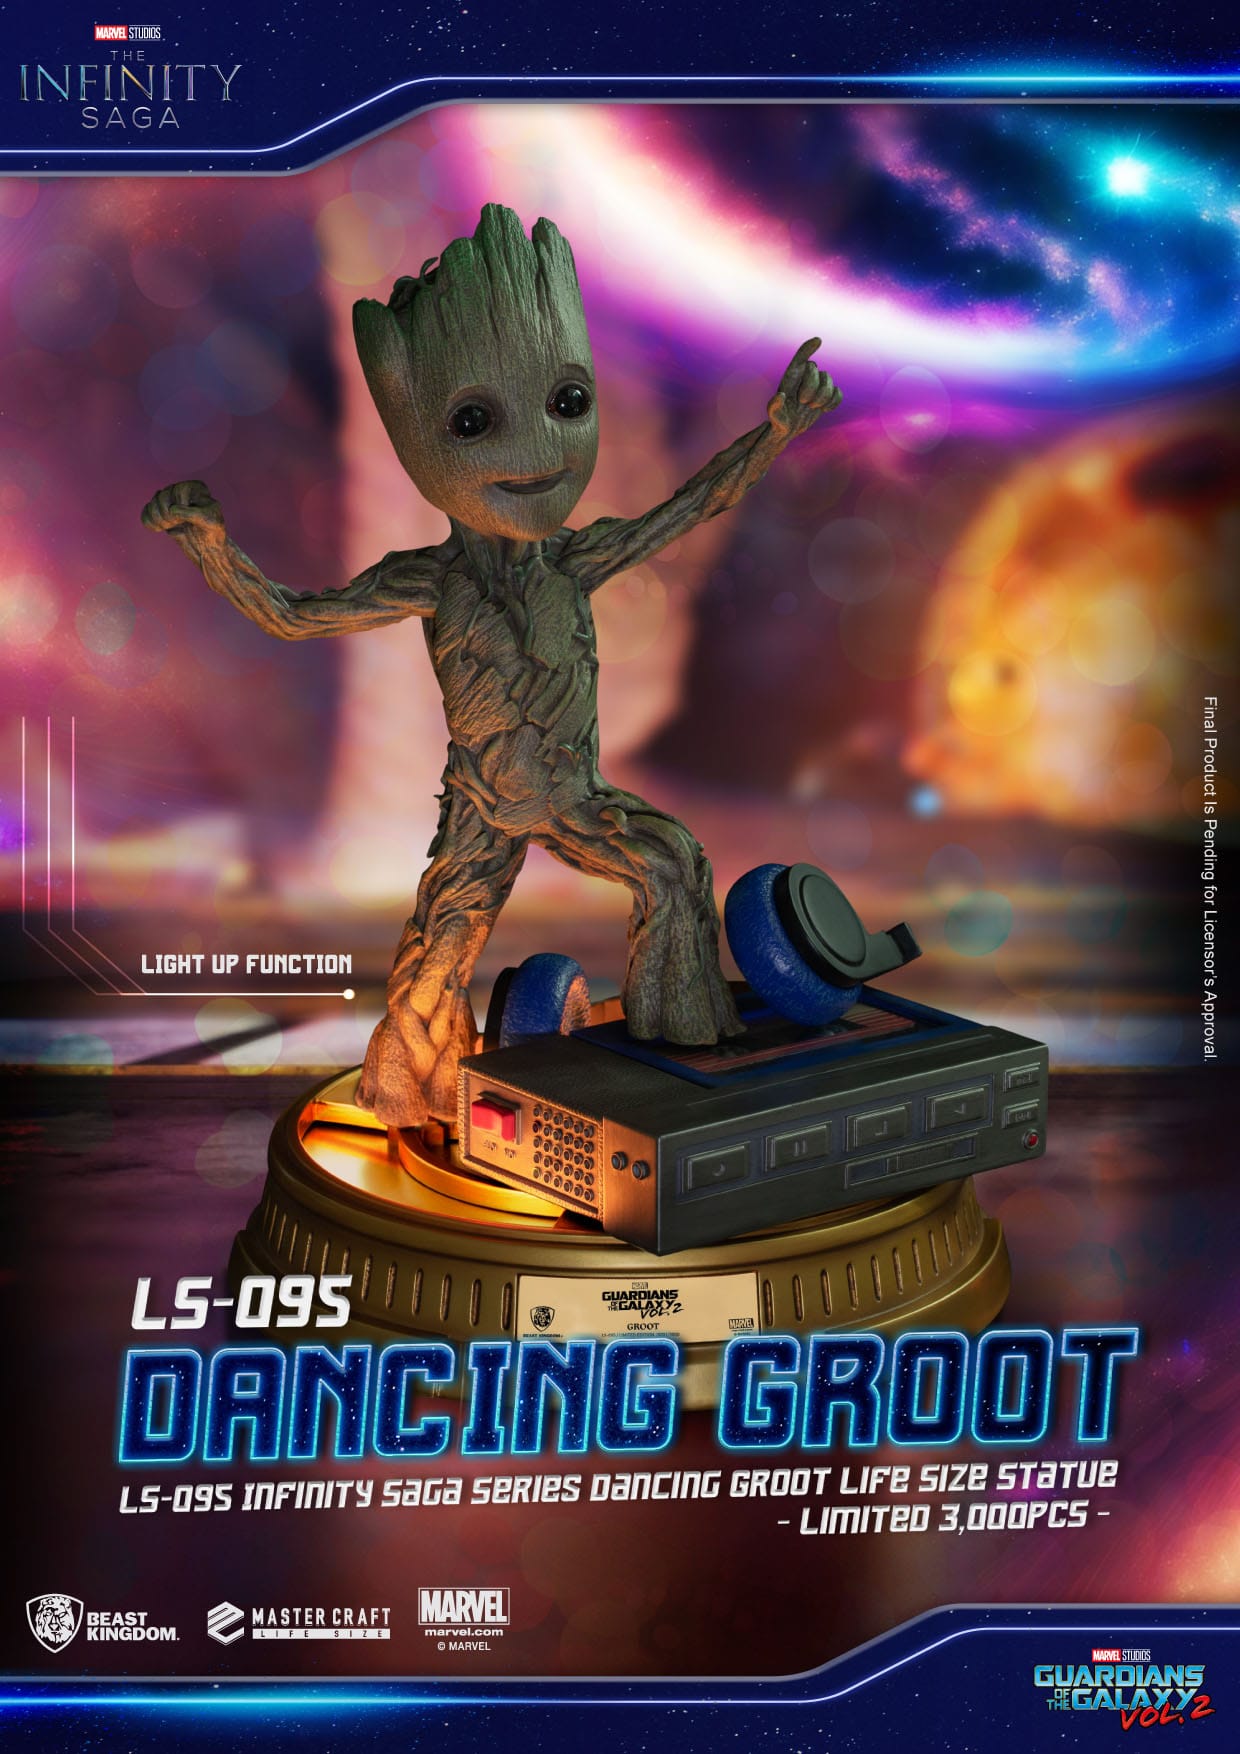 Statuette 1/1 Guardians of the Galaxy 2 - Dancing Groot - PRE-ORDER